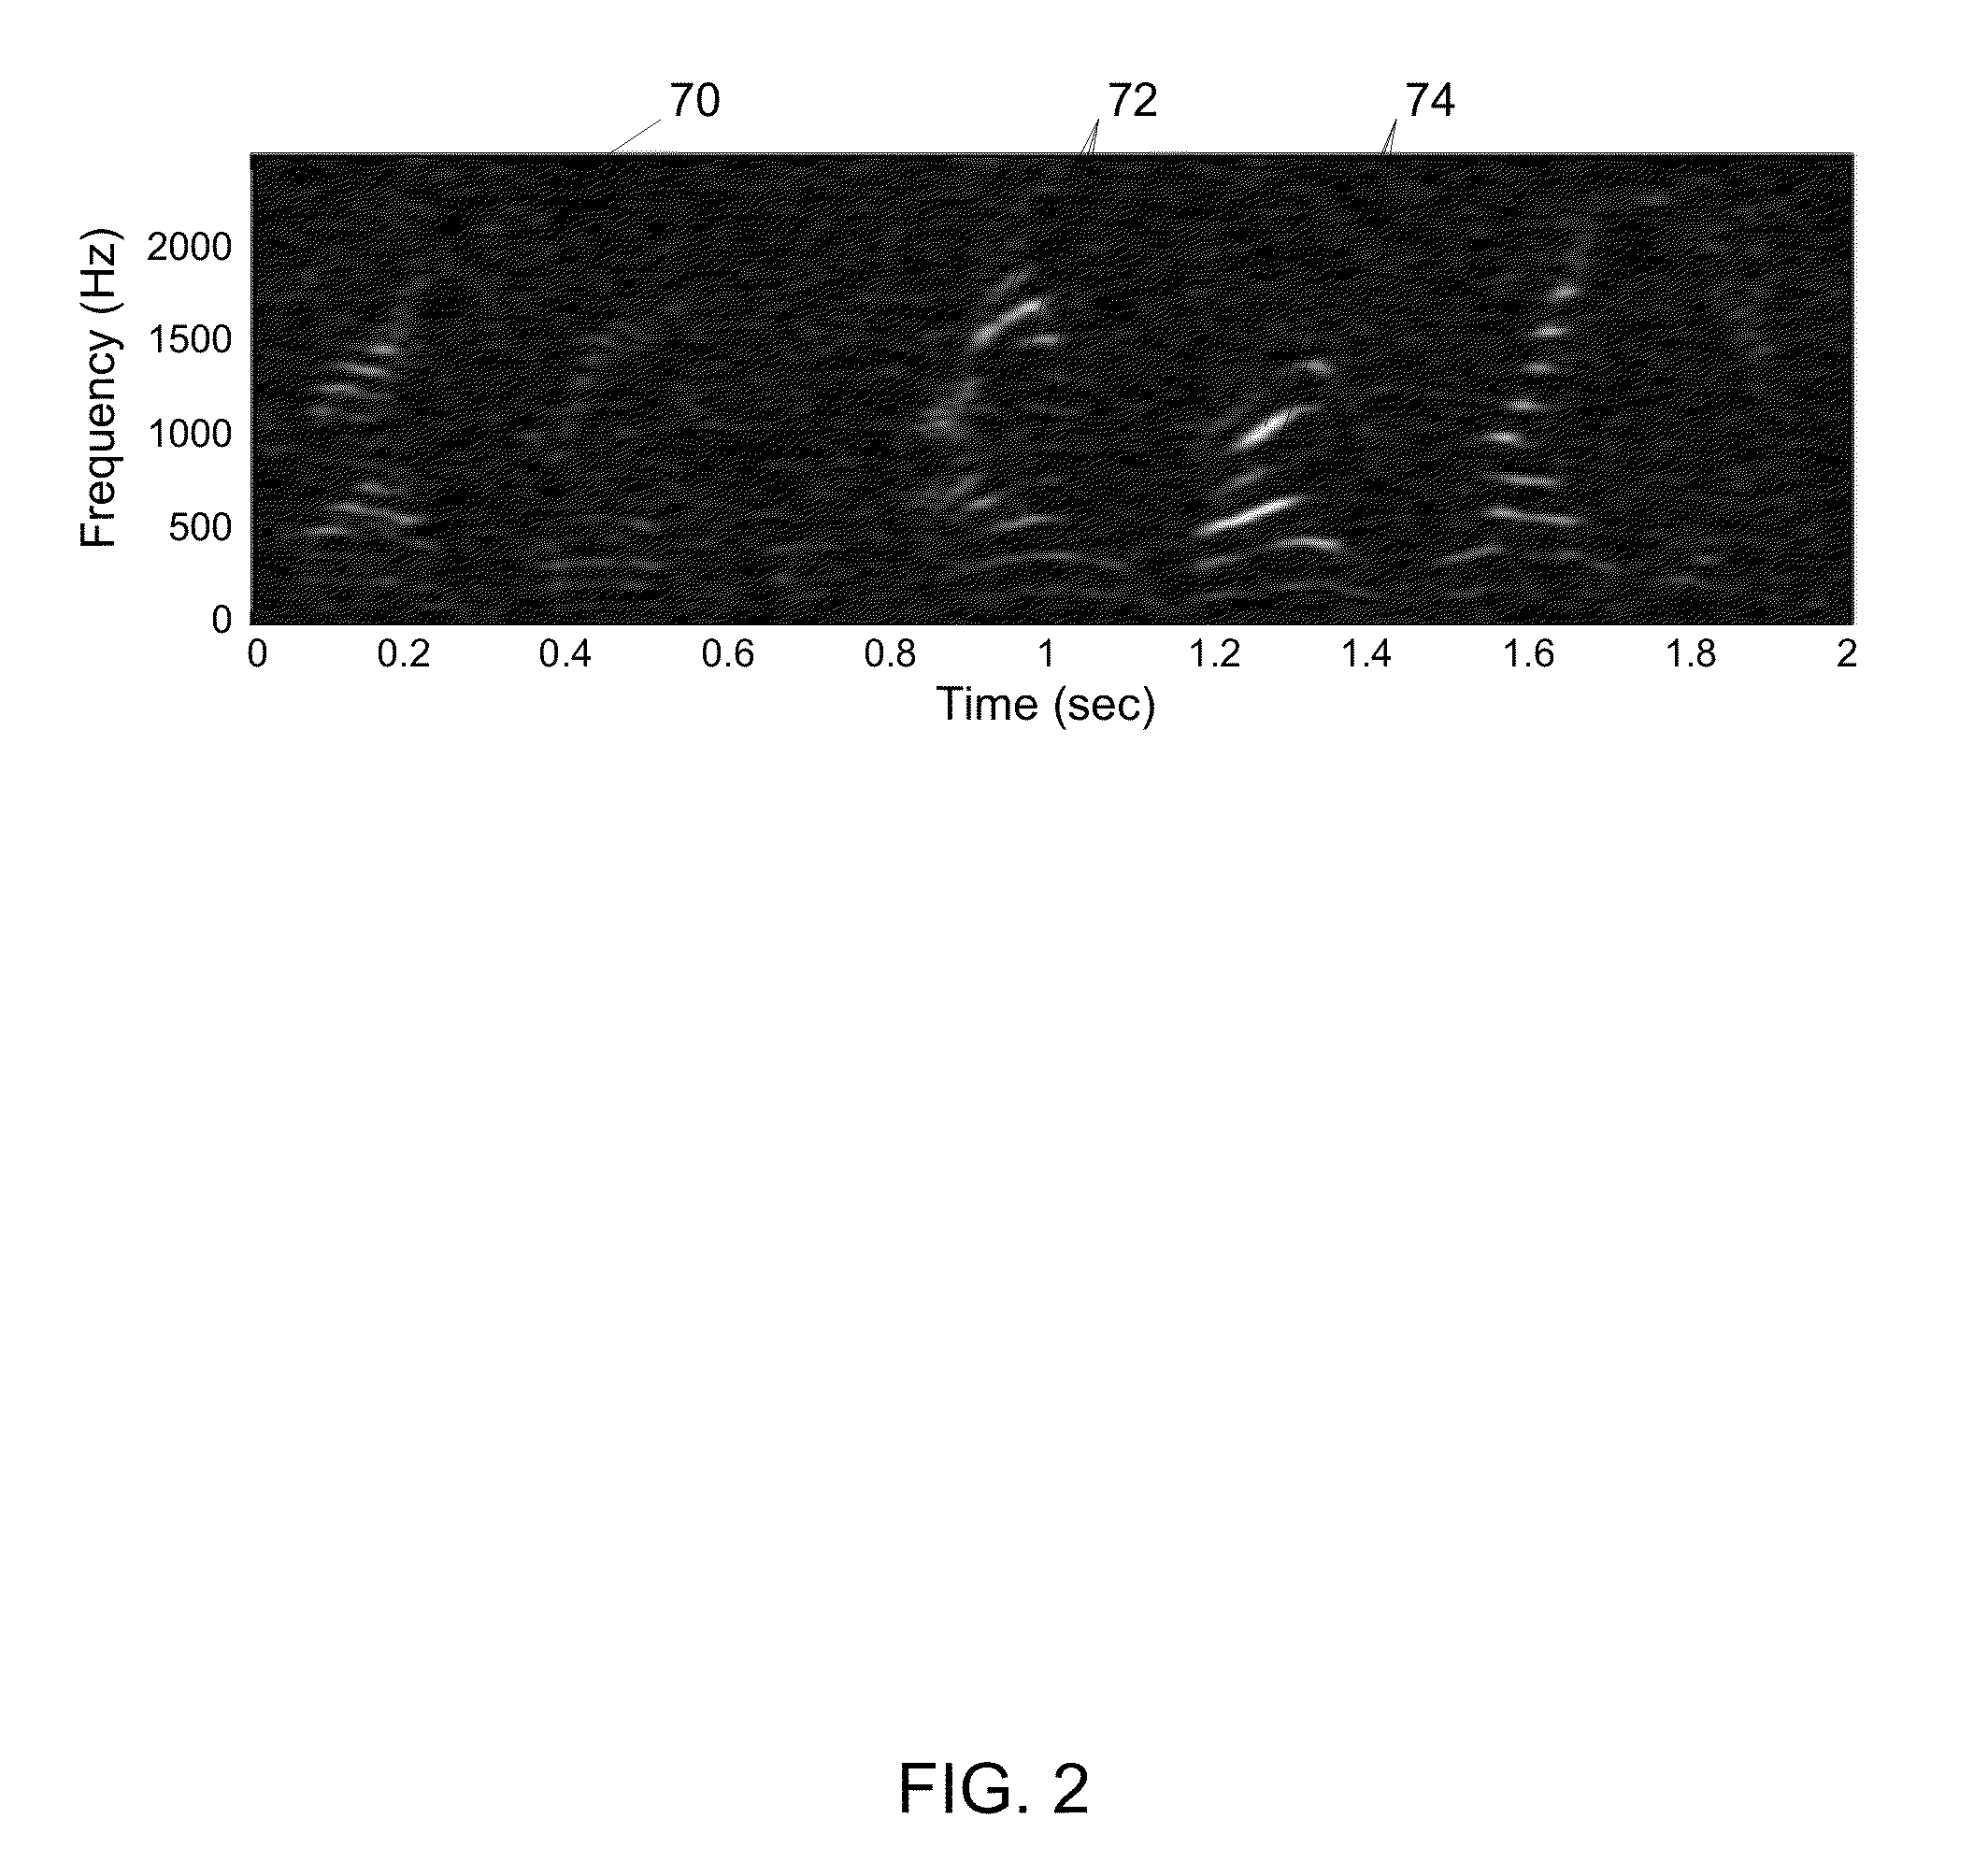 System and method of processing a sound signal including transforming the sound signal into a frequency-chirp domain